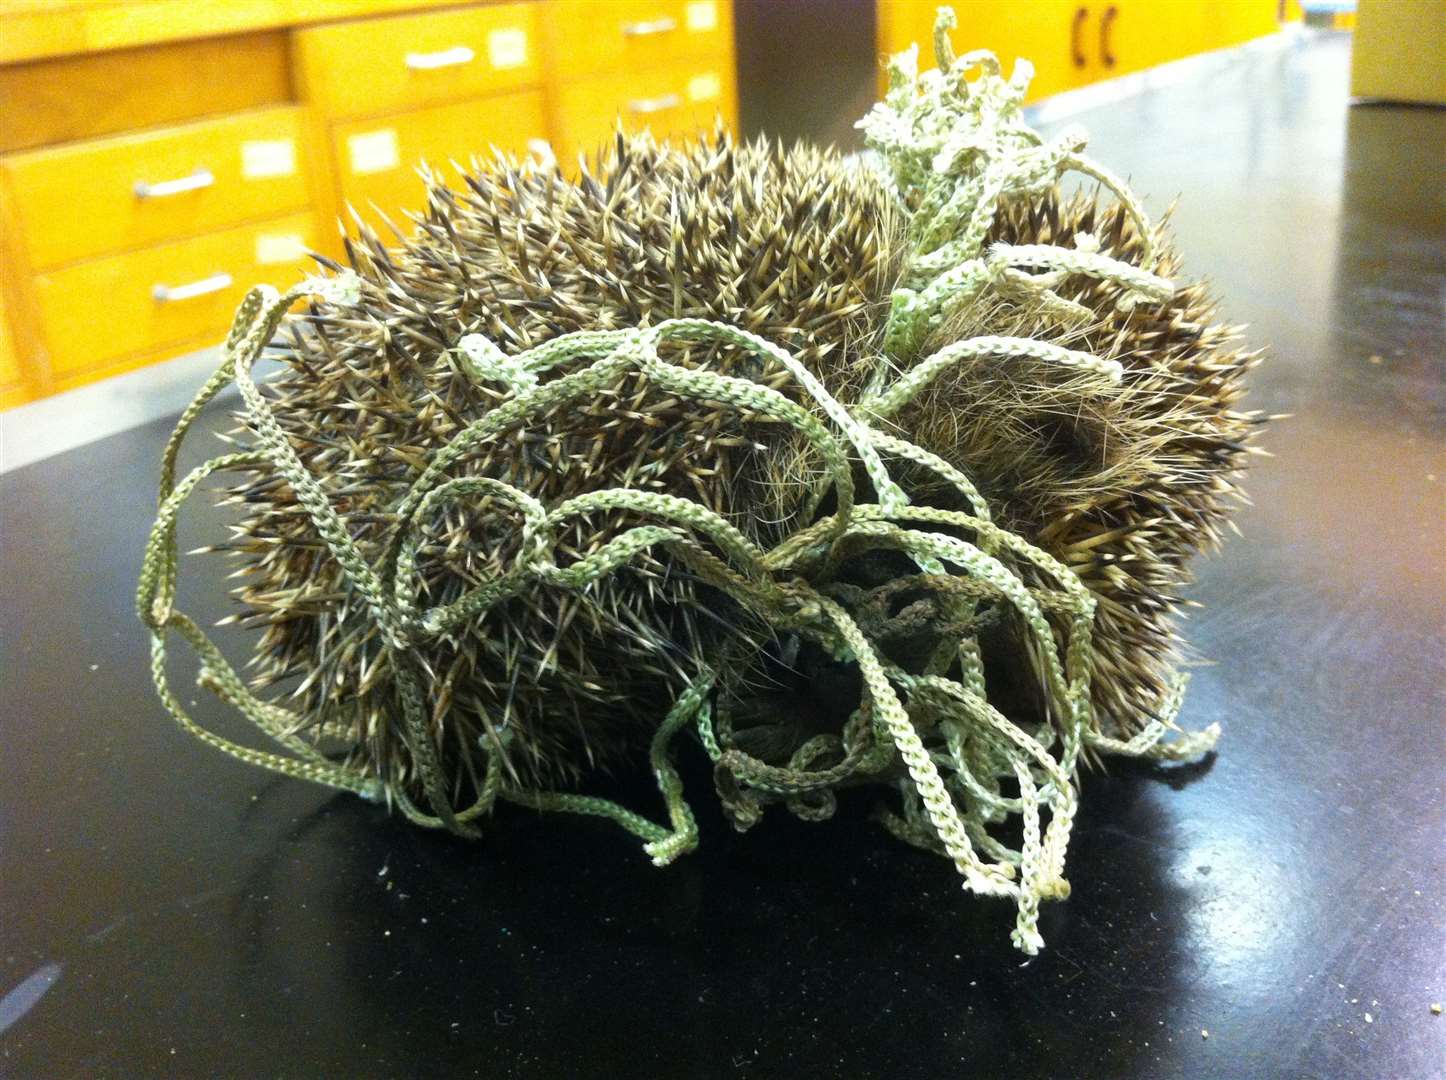 The RSPCA warn this is 'hectic hedgehog' month